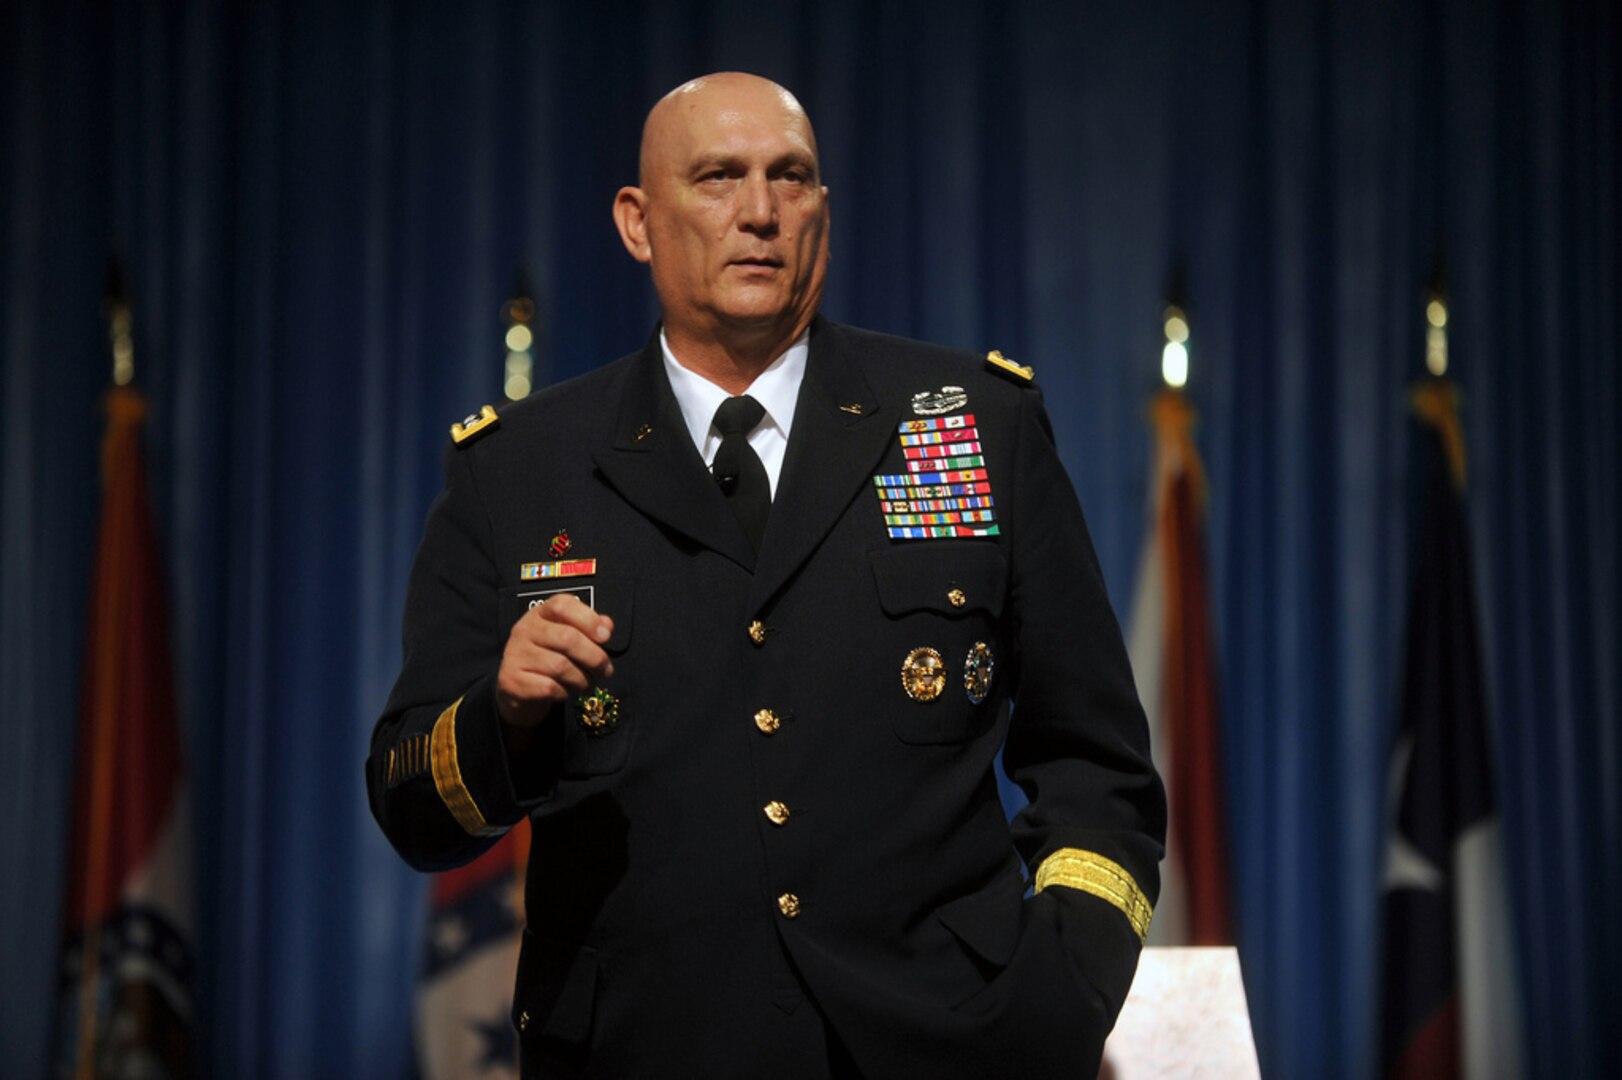 Army Gen. Raymond T. "Ray" Odierno, the chief of staff of the Army, addresses the 134th National Guard Association of the United States General Conference in Reno, Nev., on Sept. 10, 2012.